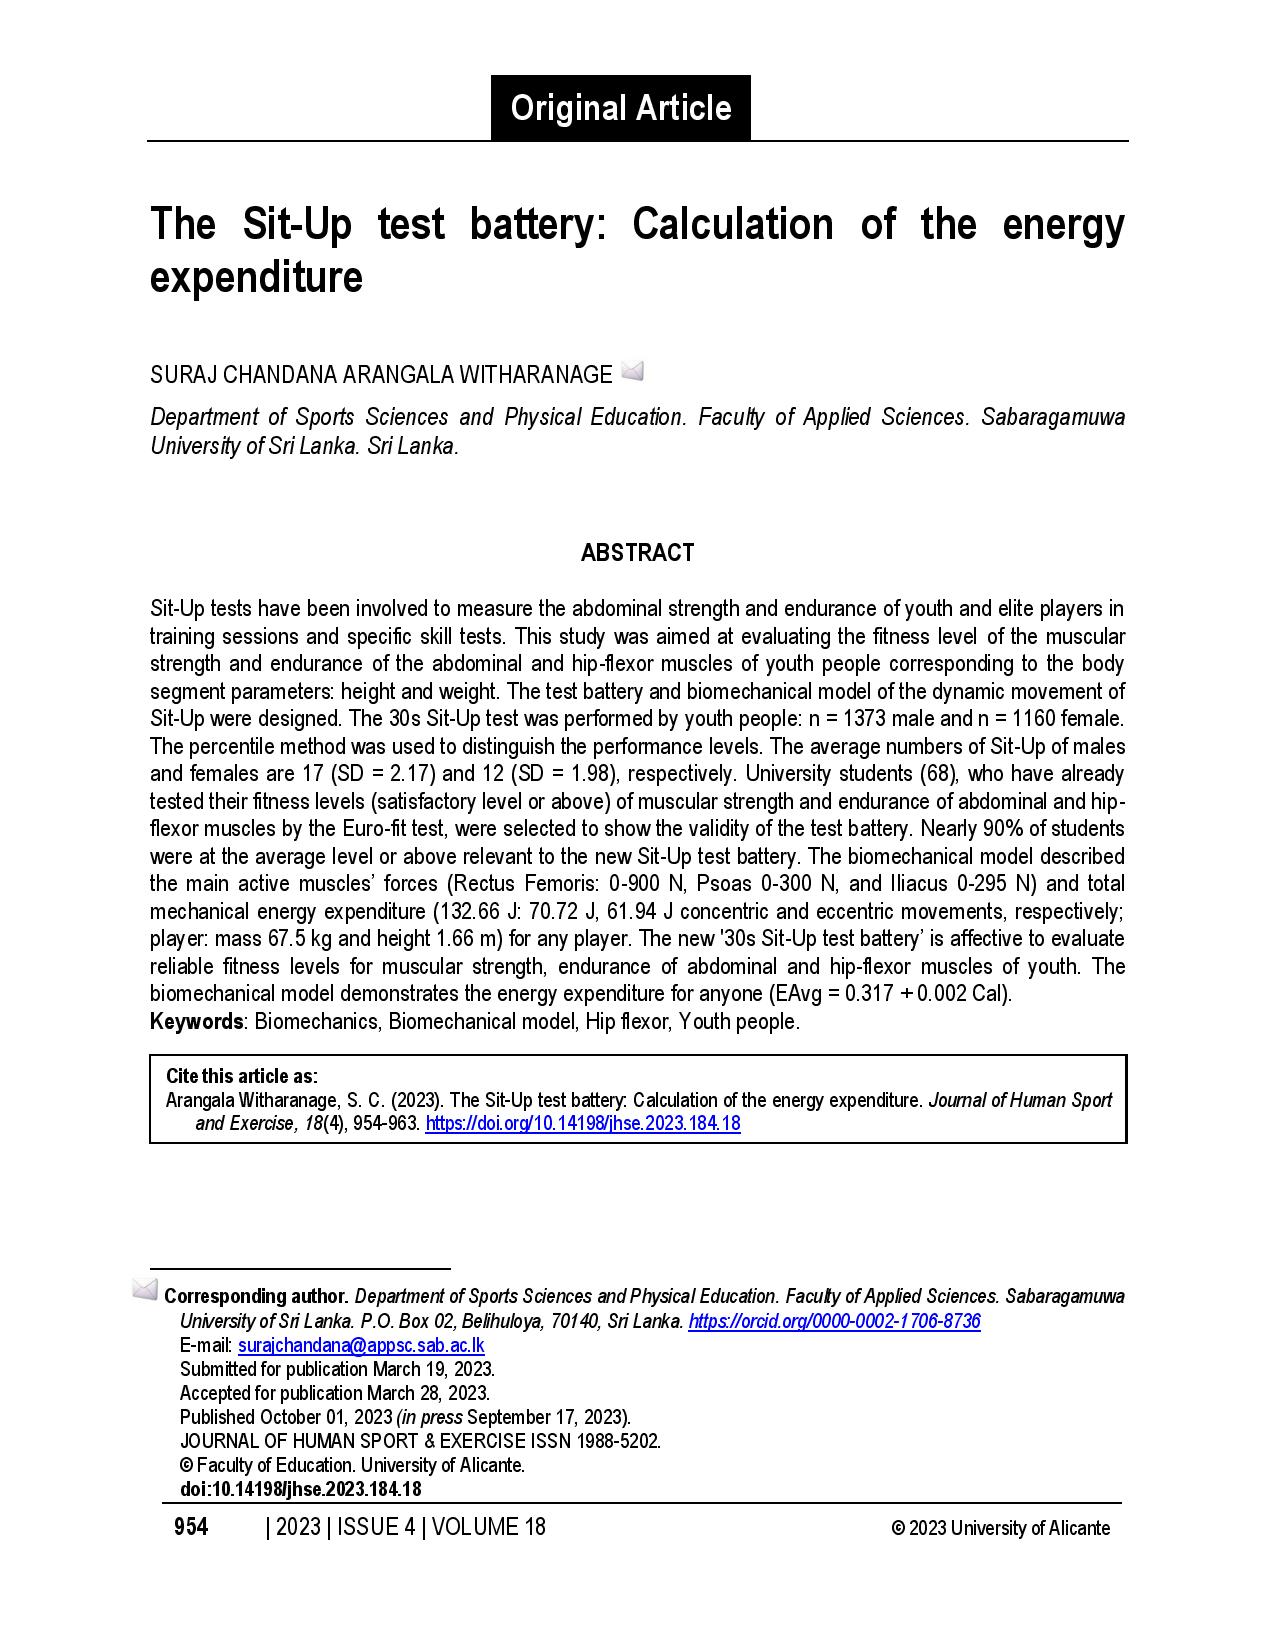 The Sit-Up test battery: Calculation of the energy expenditure